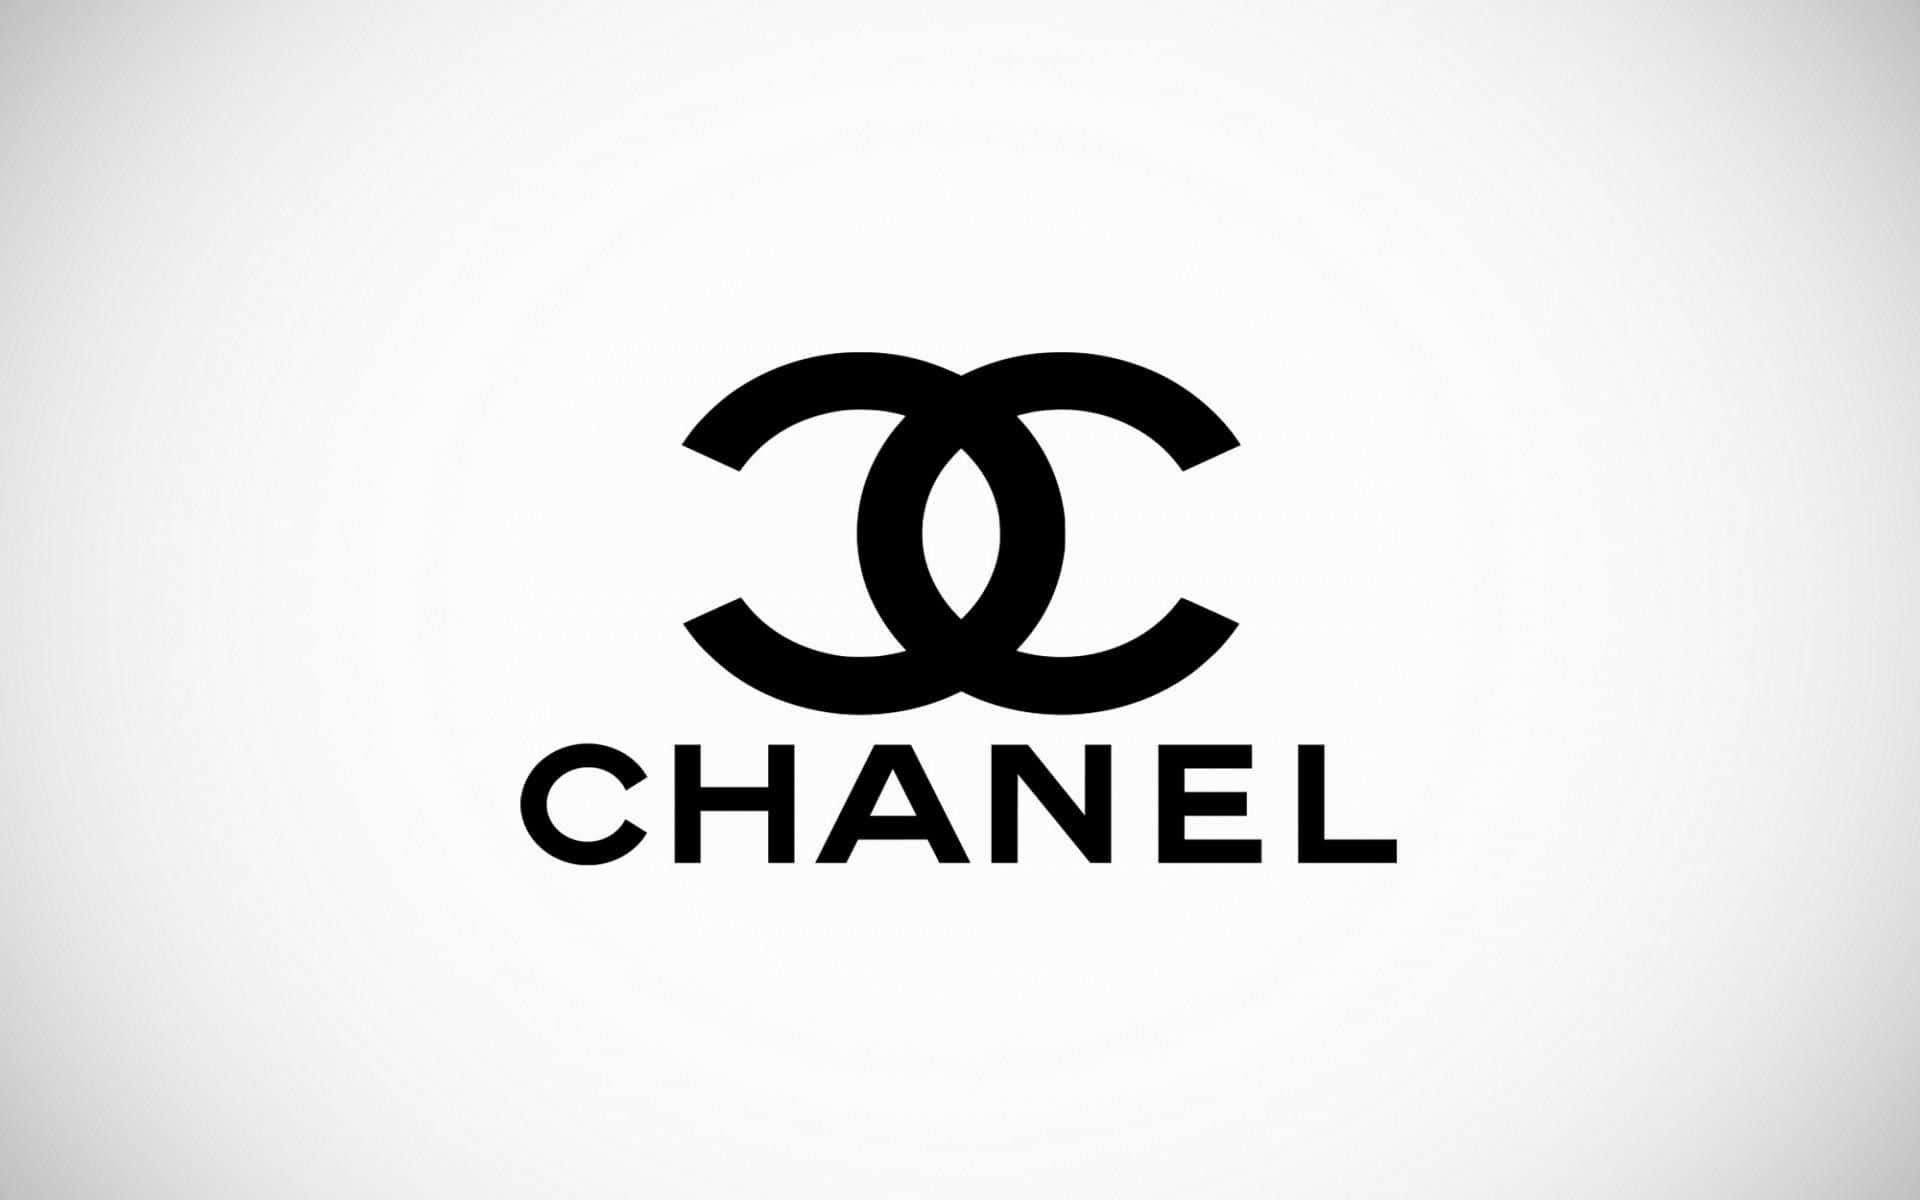 100+] Pink Chanel Logo Wallpapers